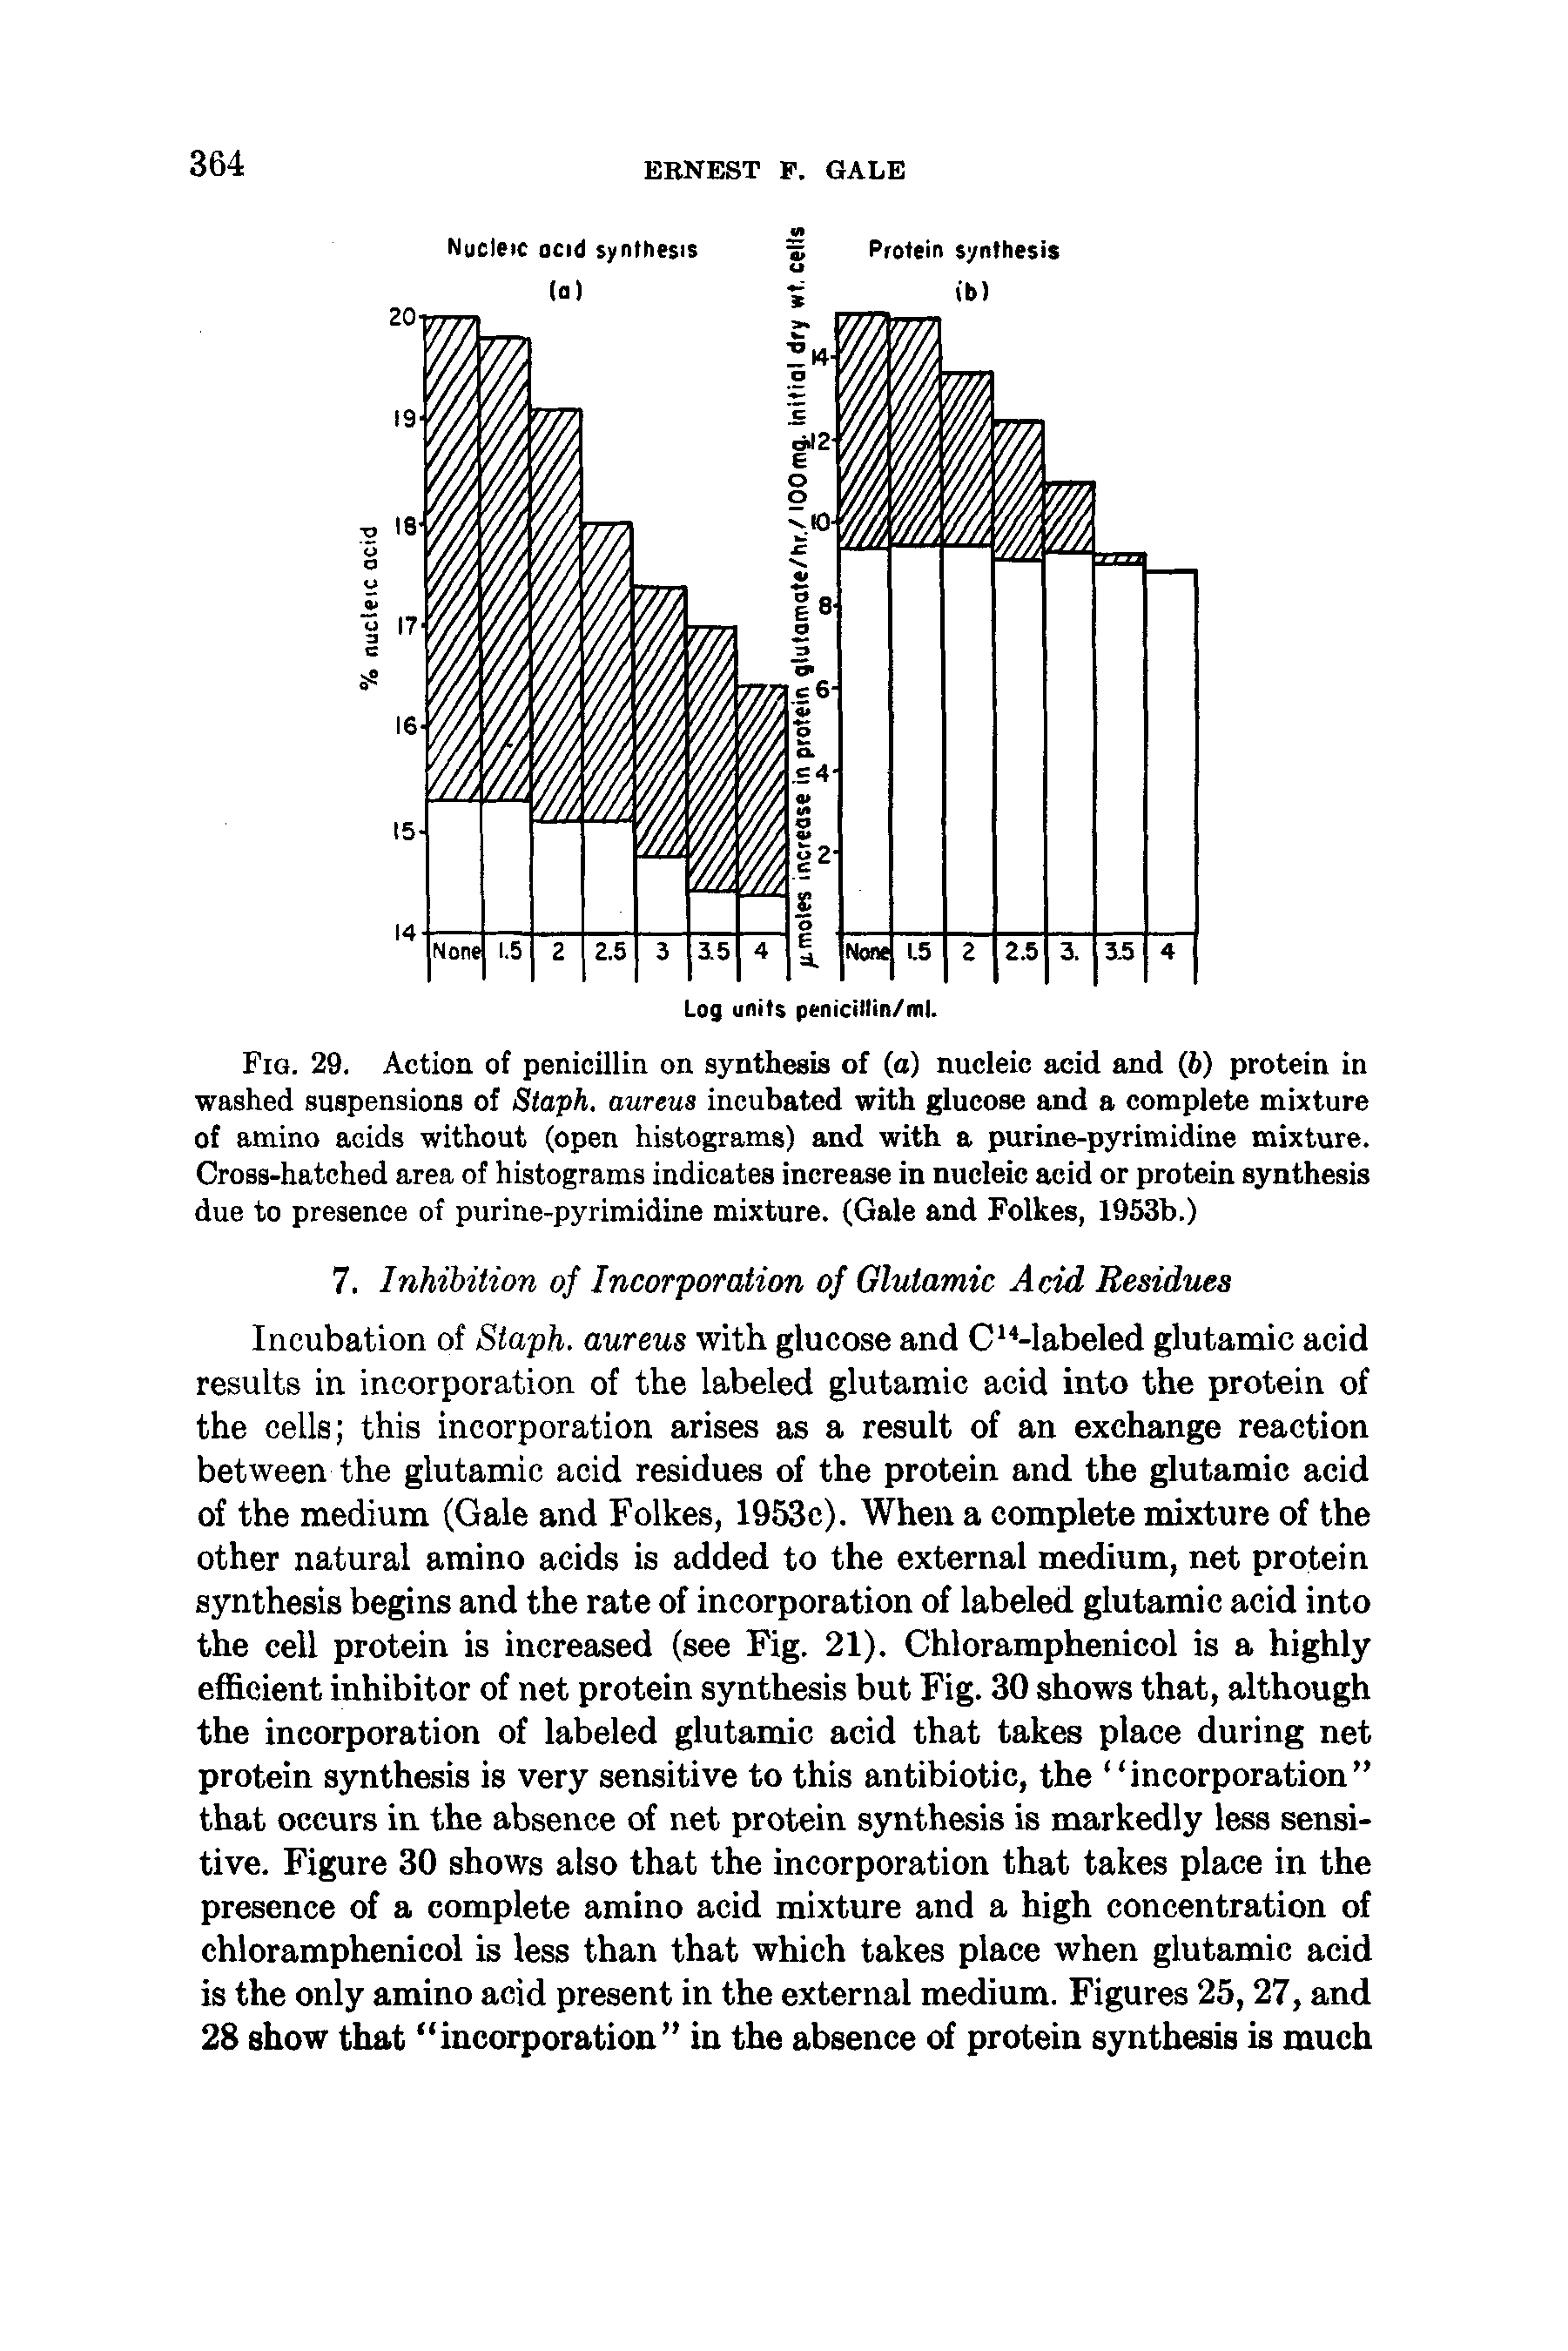 Fig. 29. Action of penicillin on synthesis of (a) nucleic acid and (6) protein in washed suspensions of Staph, aureus incubated with glucose and a complete mixture of amino acids without (open histograms) and with a purine-pyrimidine mixture. Cross-hatched area of histograms indicates increase in nucleic acid or protein synthesis due to presence of purine-pyrimidine mixture. (Gale and Folkes, 1953b.)...